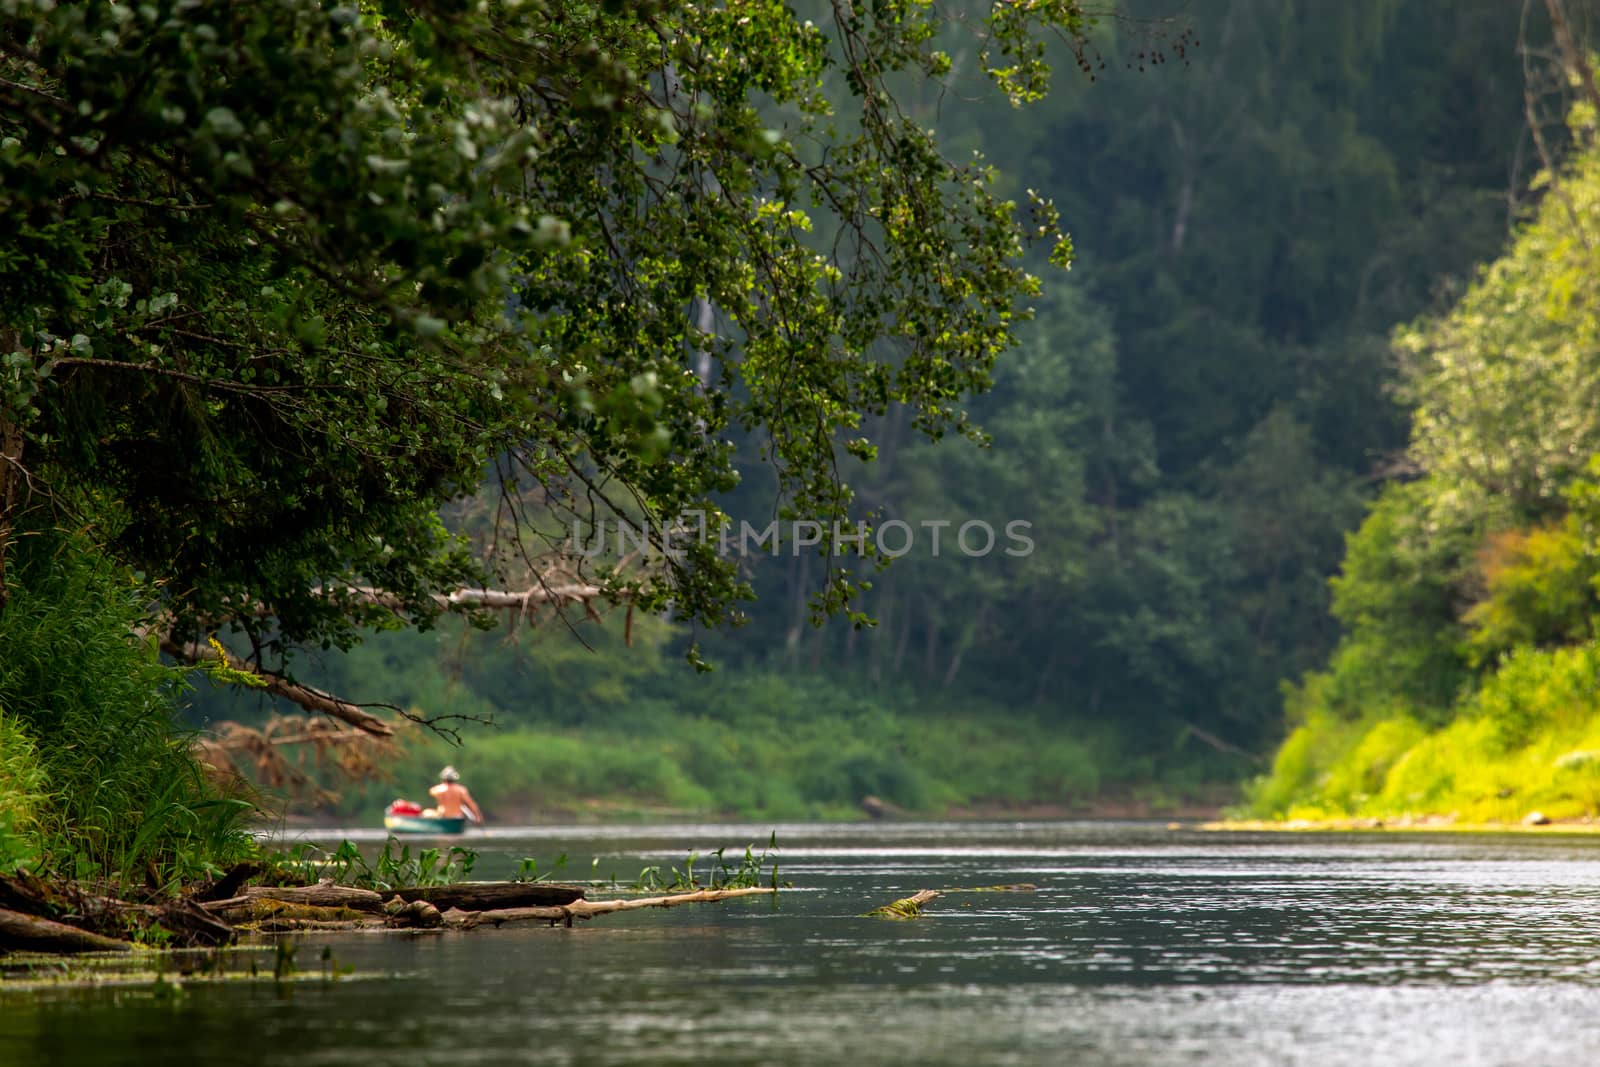 People boating on river Gauja in Latvia, peacefull nature scene. By boat through the river. Boat trip along the Gauja River in Latvia. The Gauja is the longest river in Latvia, which is located only in the territory of Latvia. Length - 452 km.



